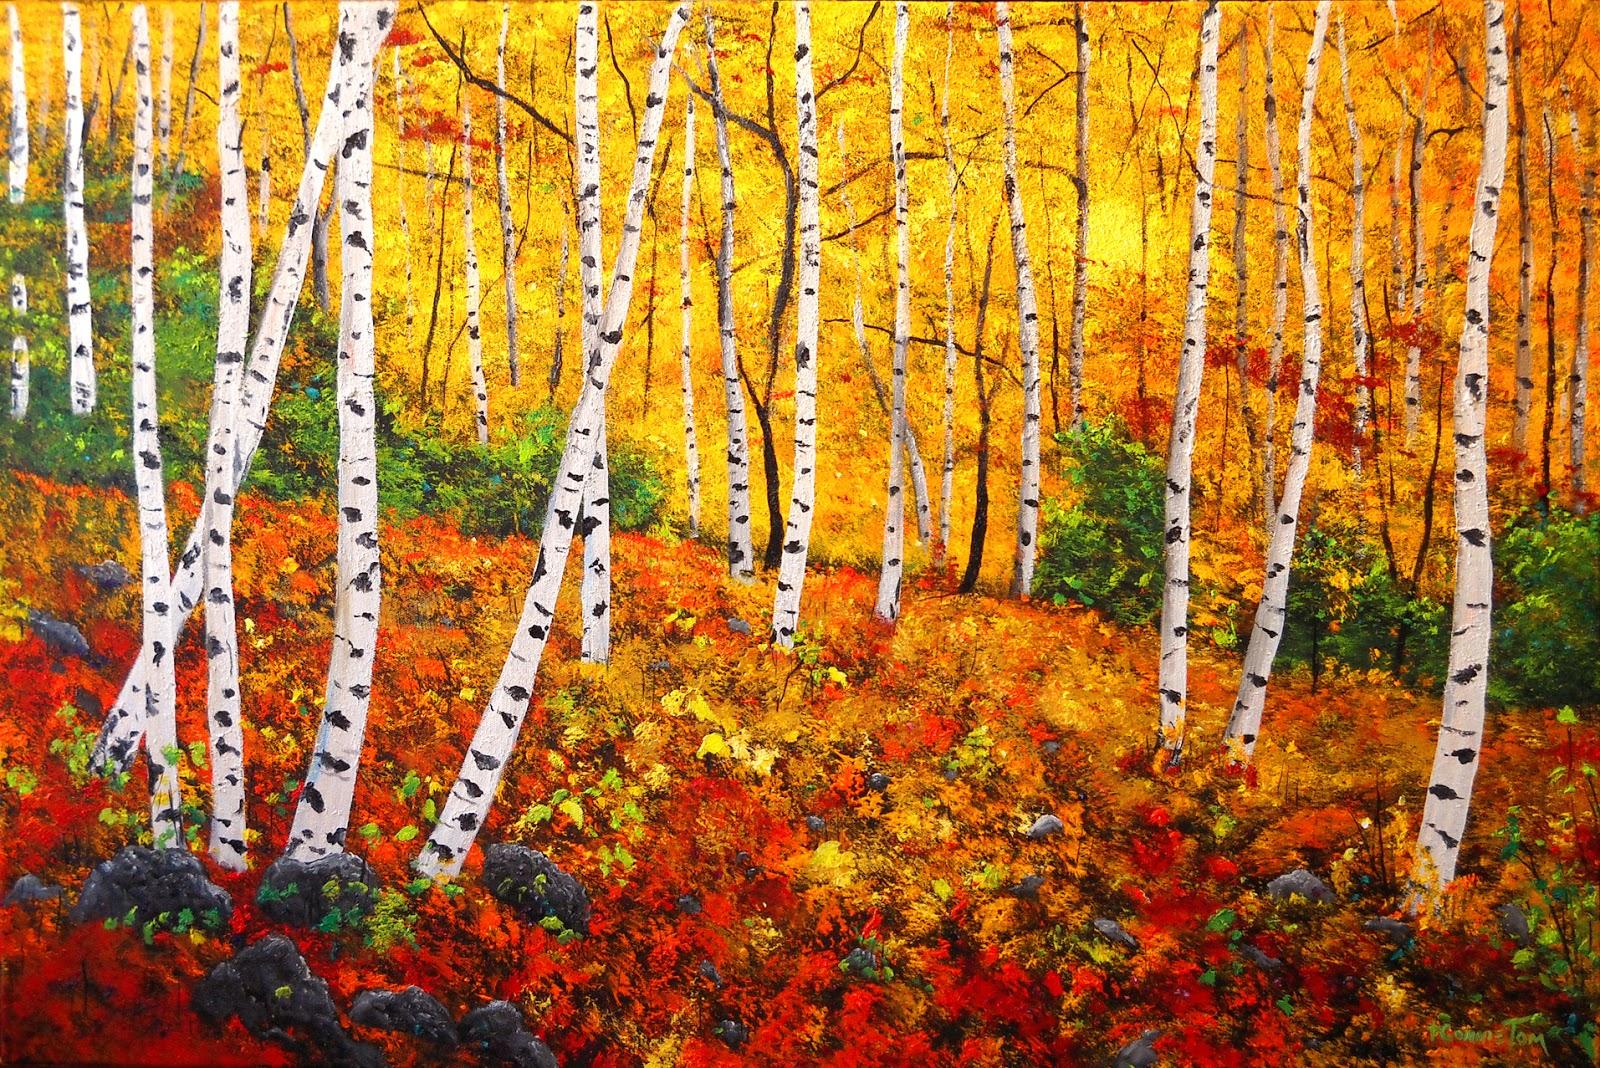 Birch Tree Forest Painting. Explore